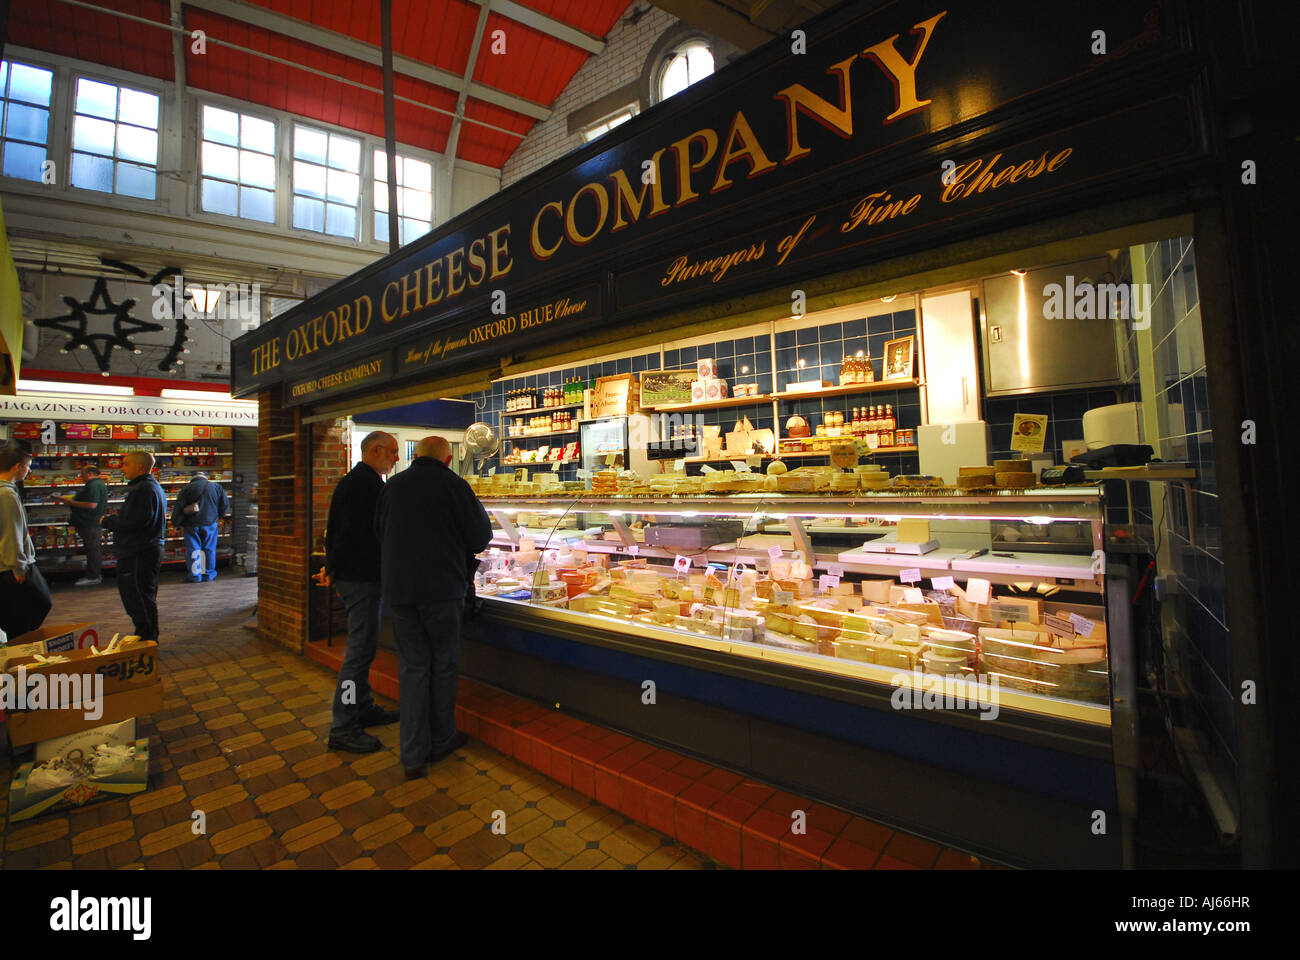 OXFORD The Oxford Cheese Company in the Covered Market Stock Photo - Alamy